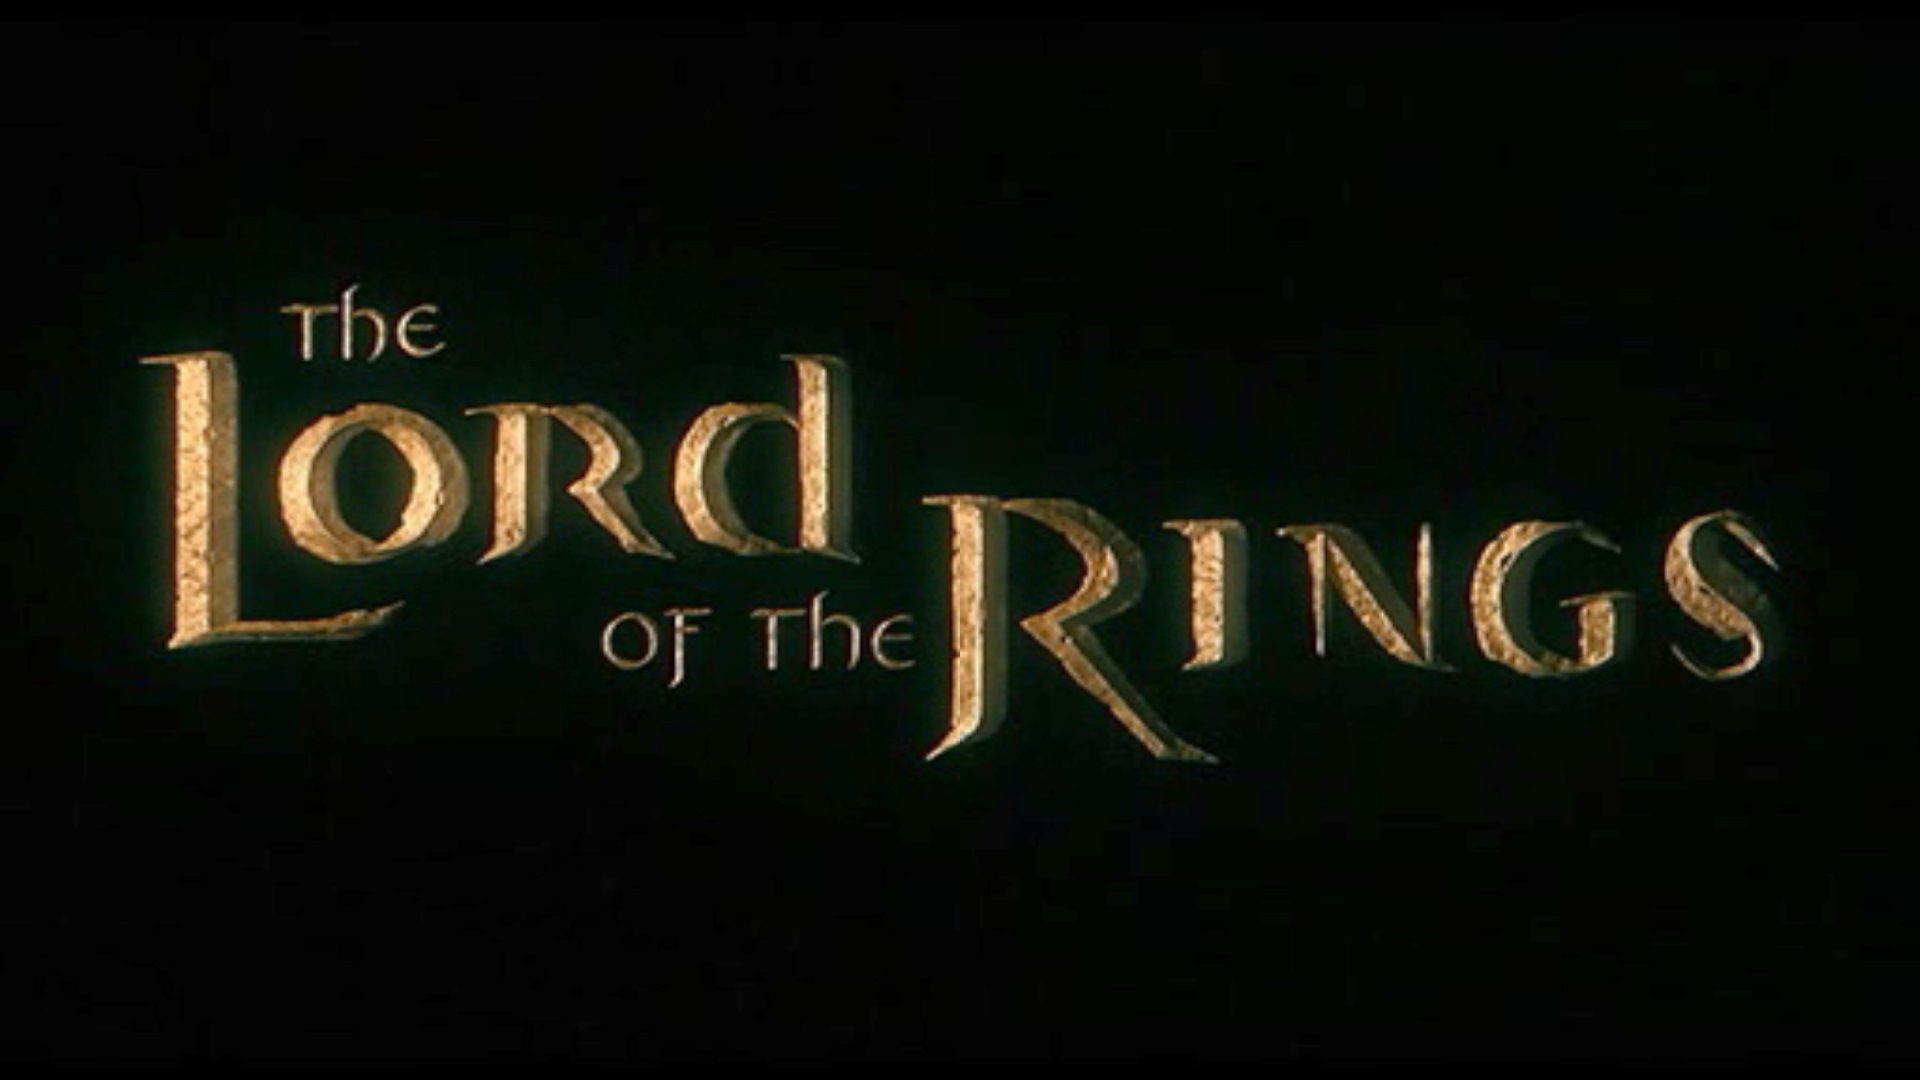 The Lord of the Rings: The Return of free downloads